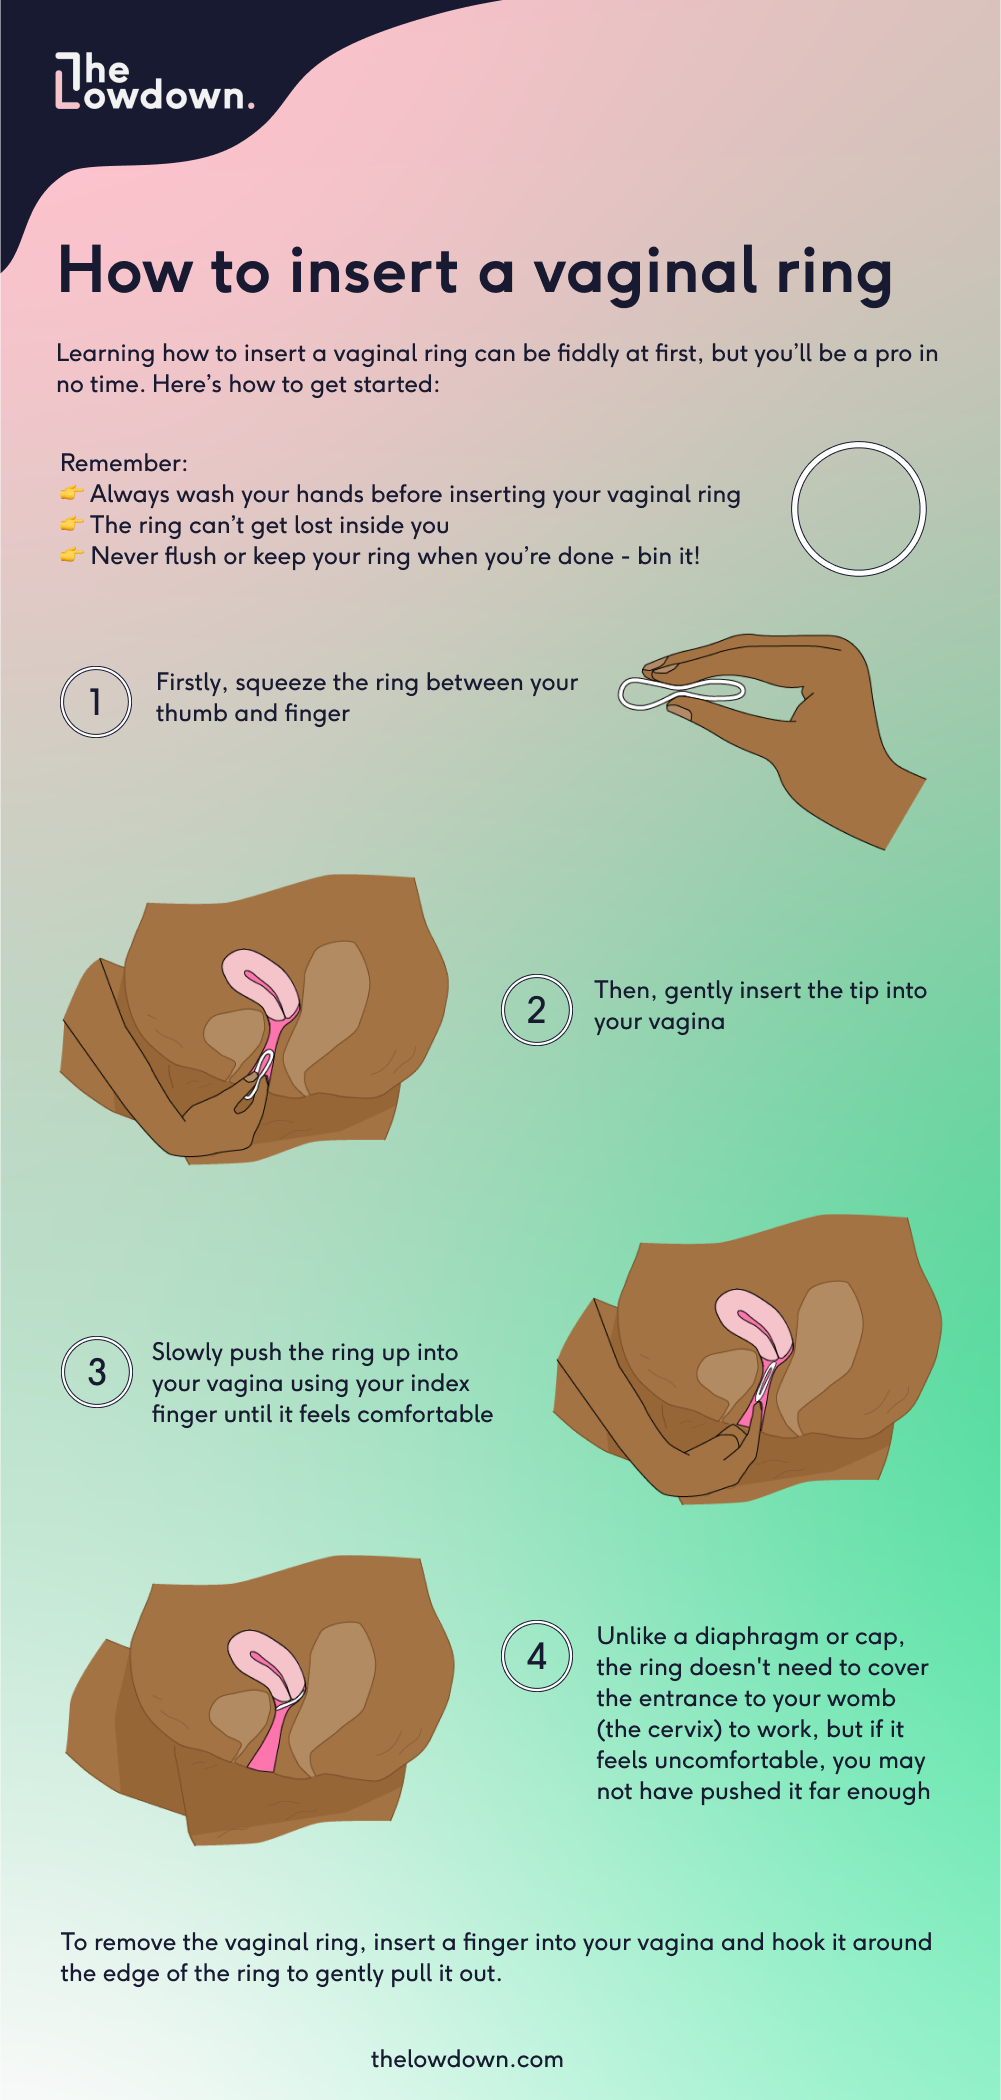 How to insert the vaginal ring | The Lowdown